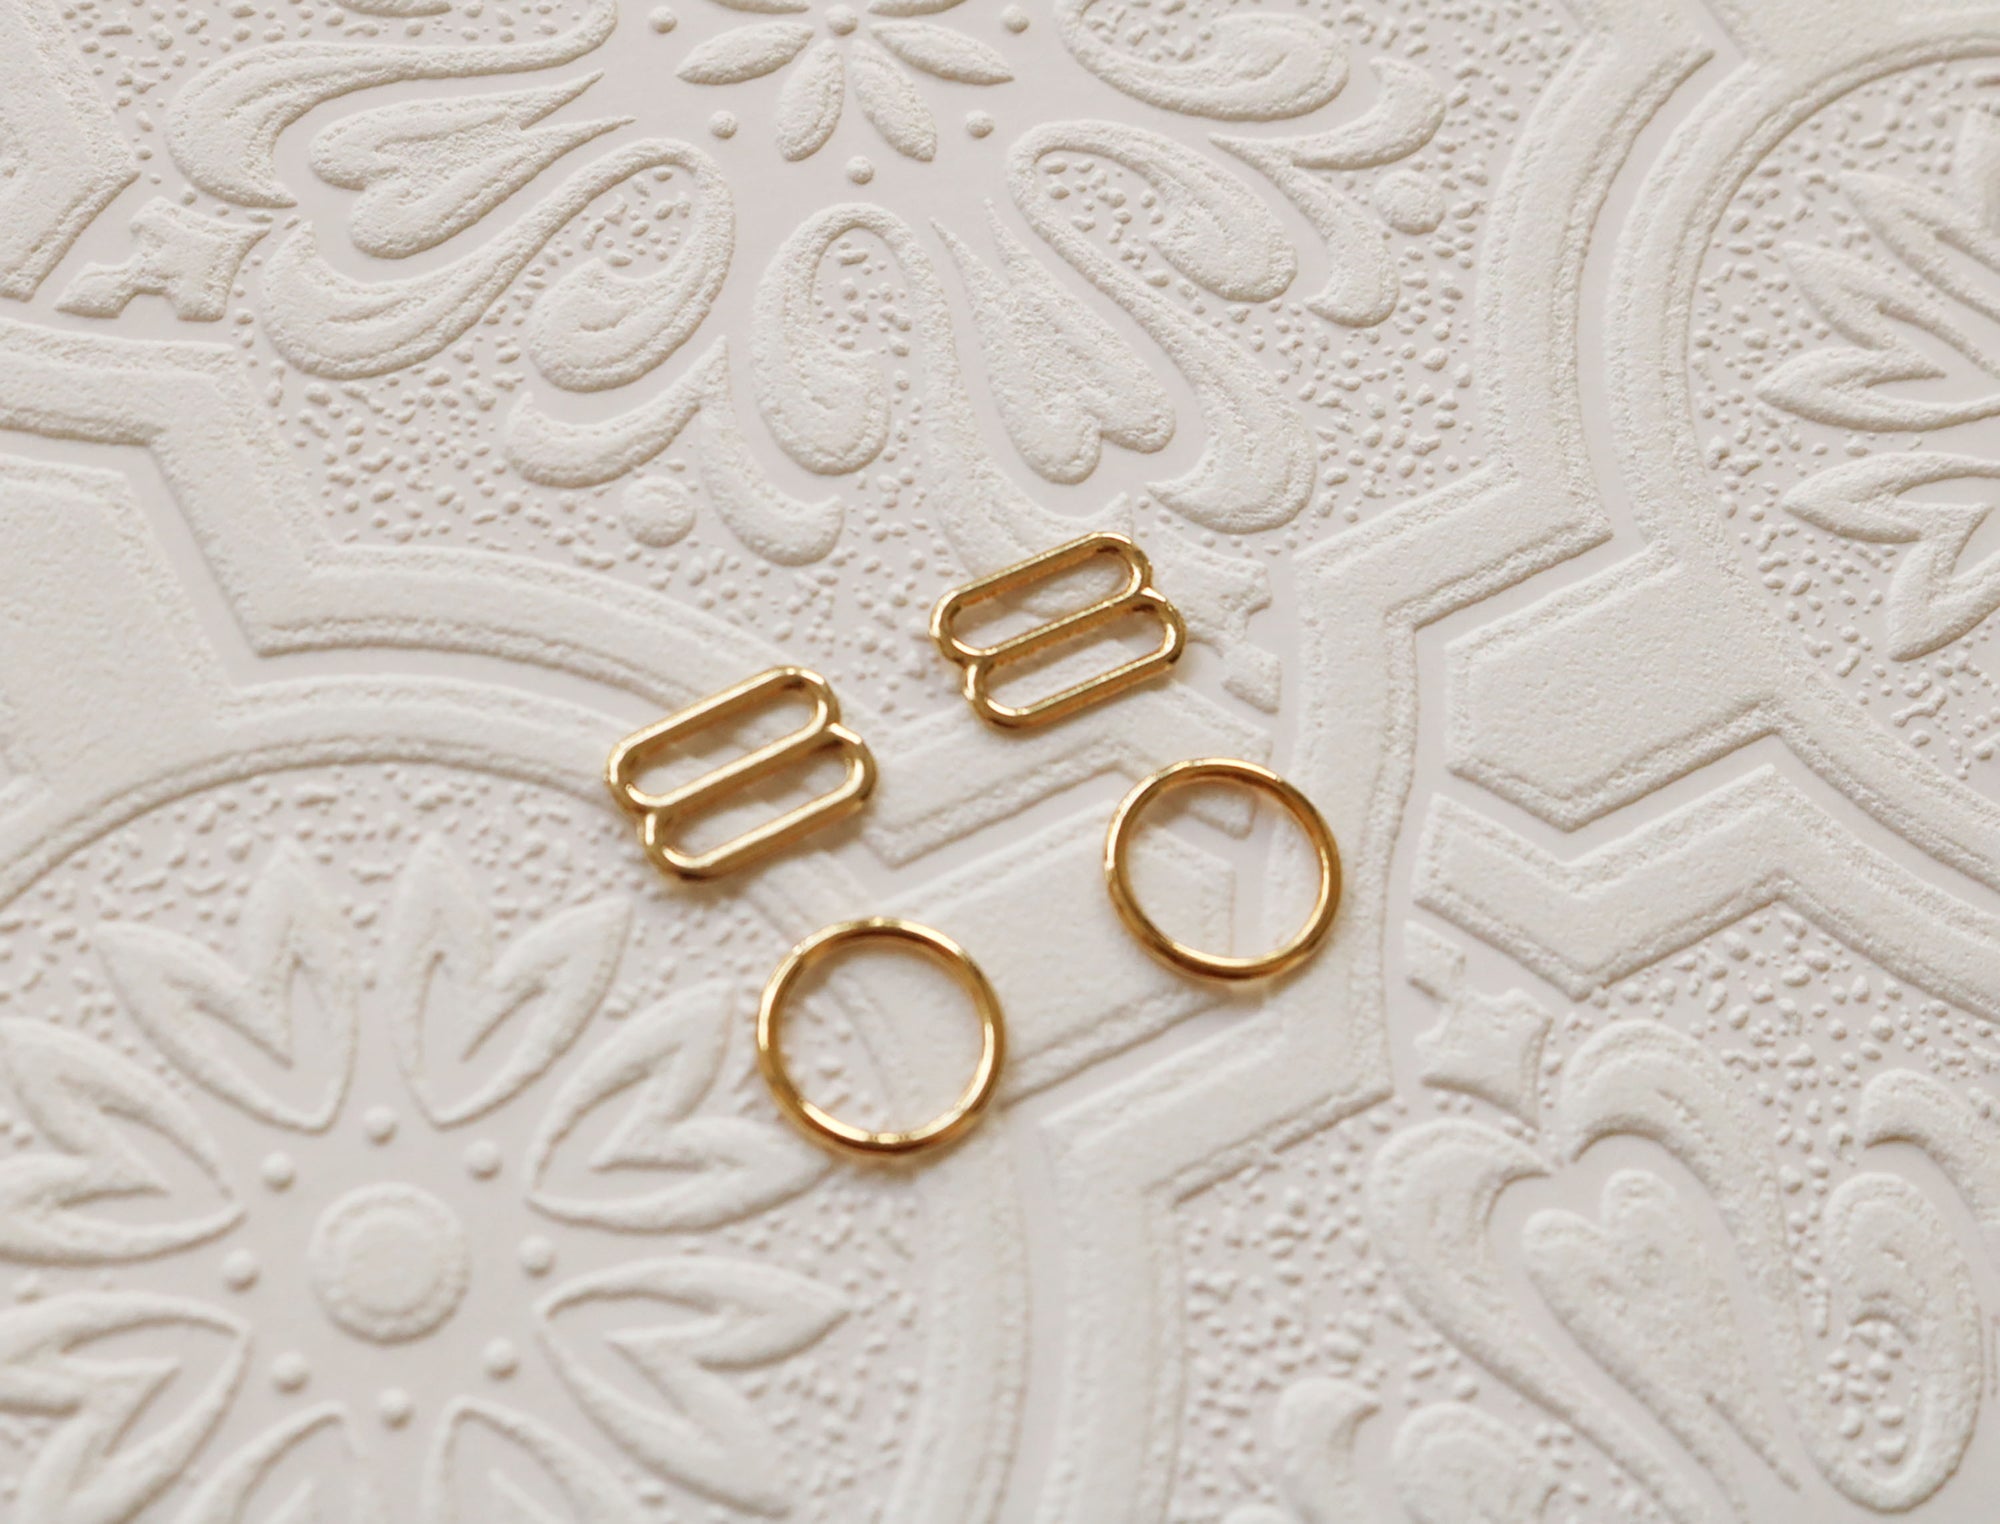 22K Gold-Plated Rings and Sliders for Bra Making, 1/2"